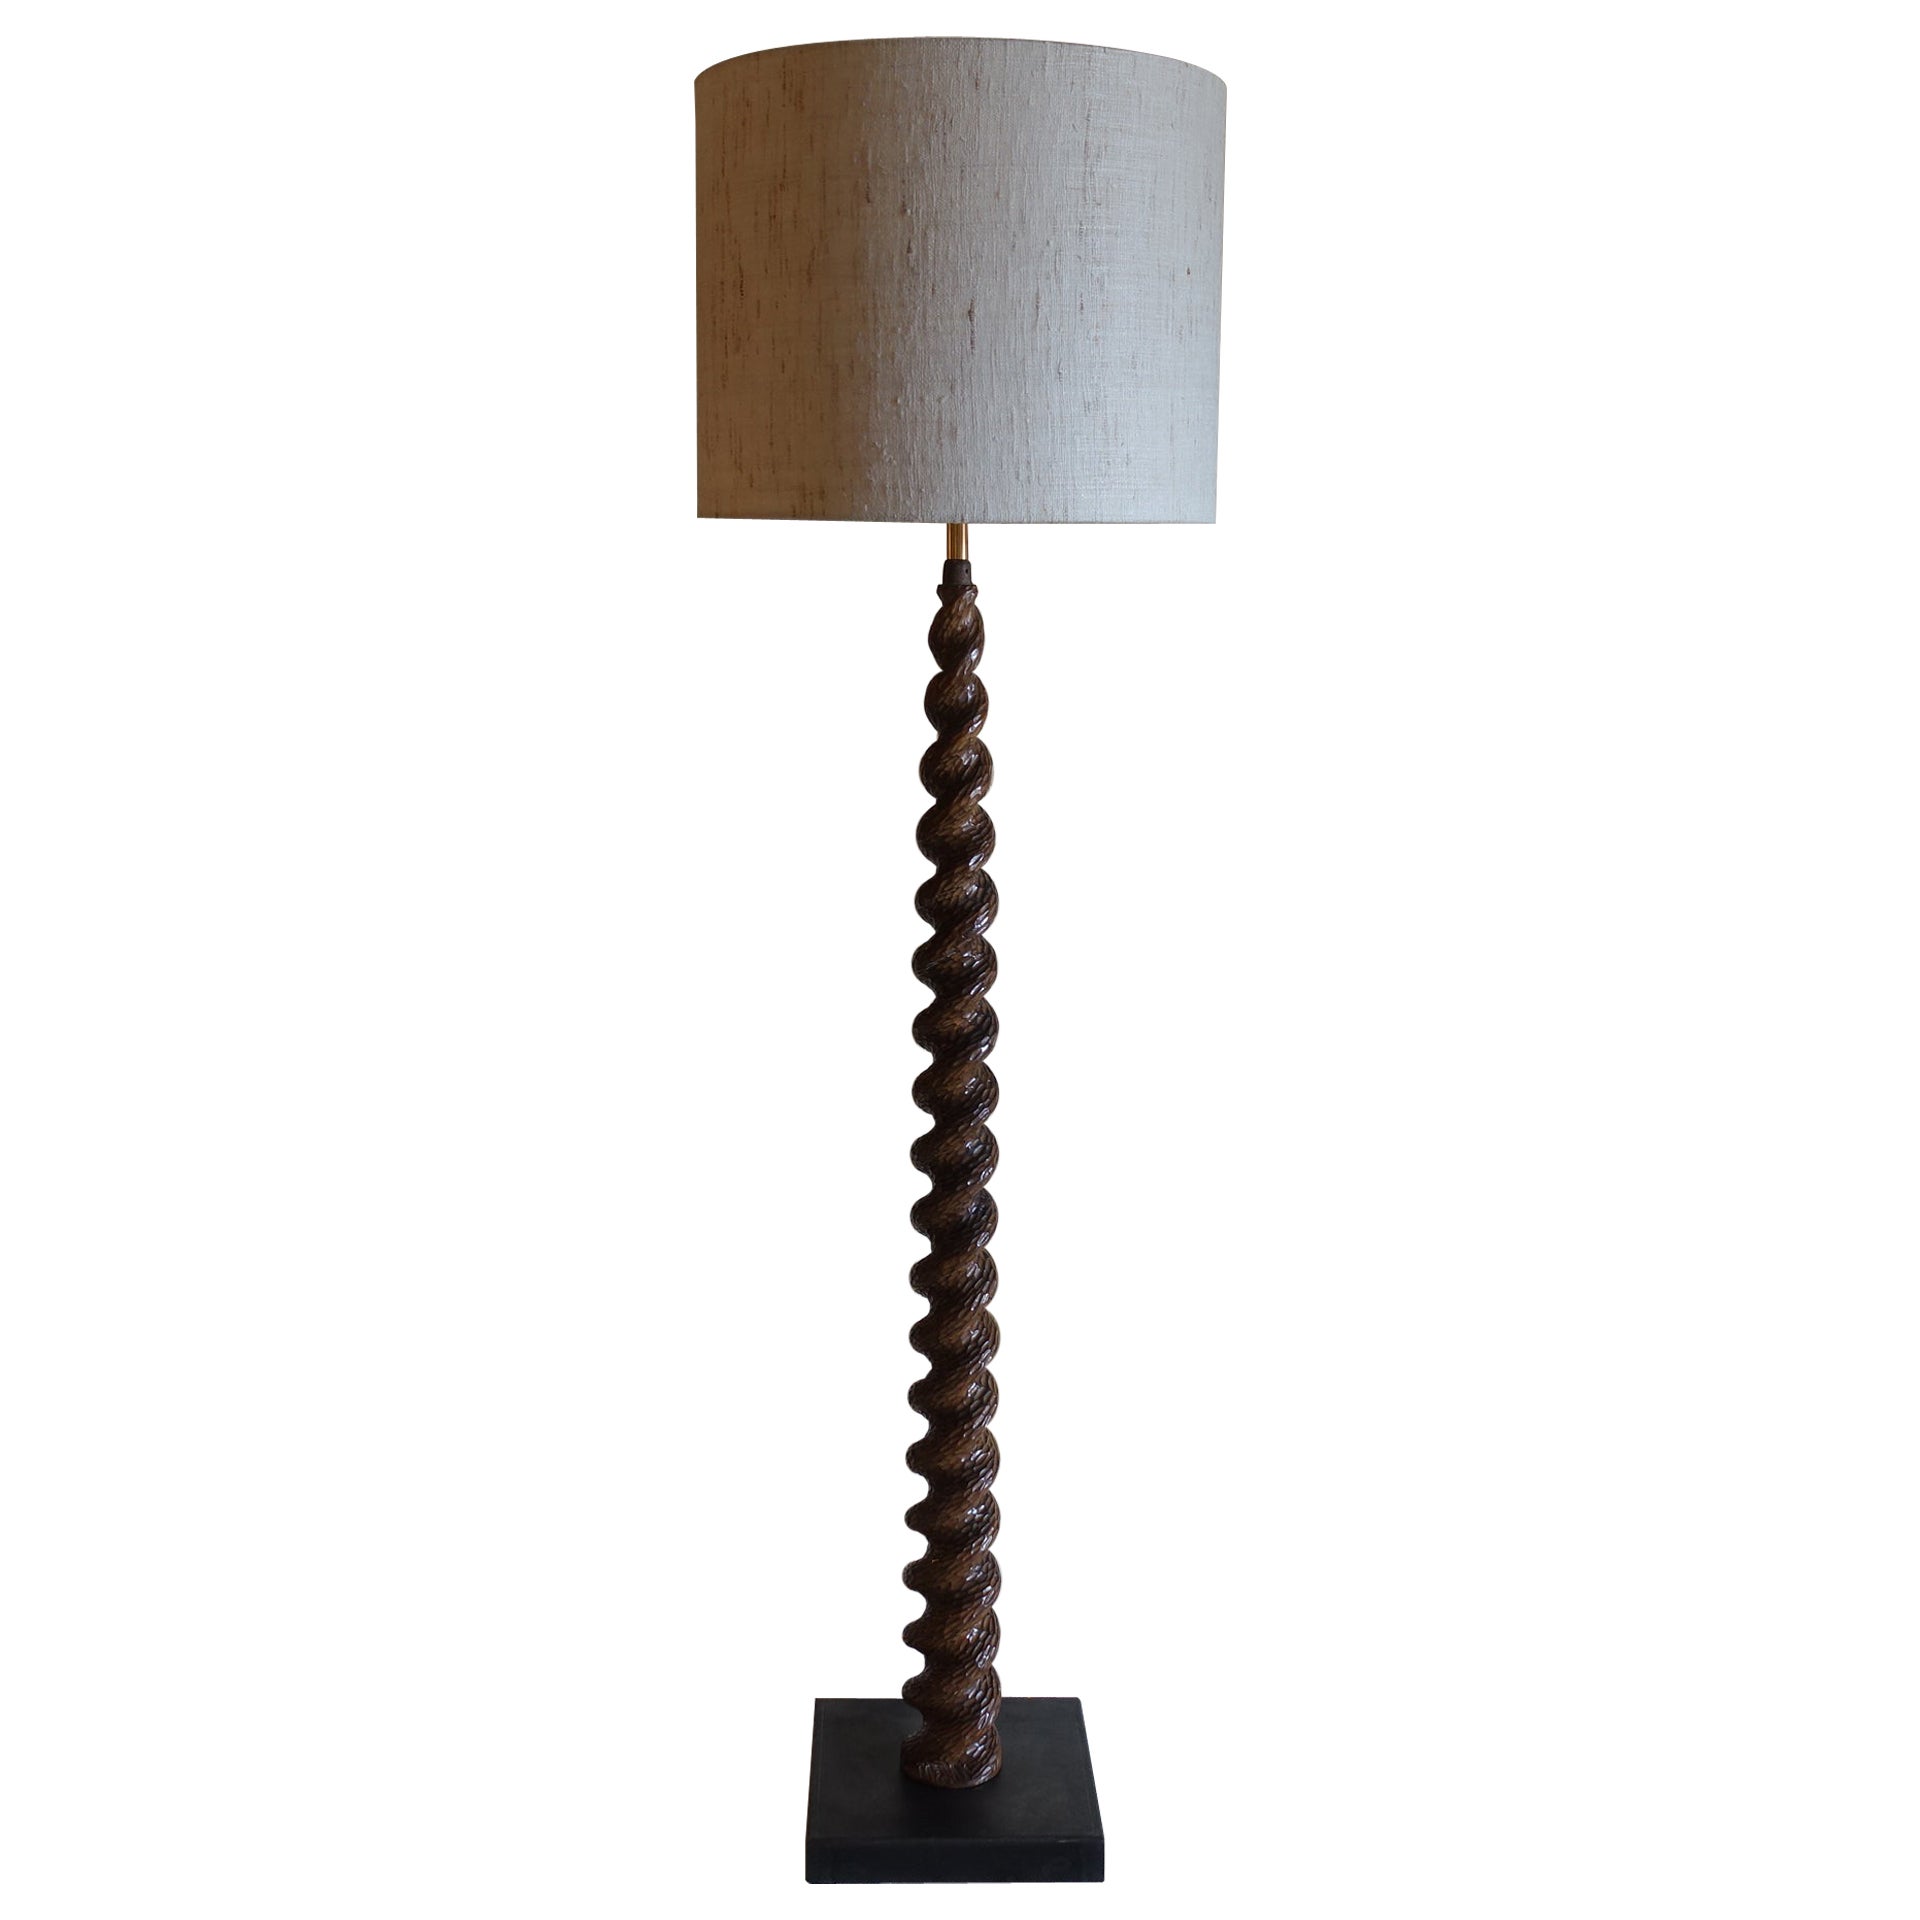 1960's Italian Floor Lamp in Carved Spiral Wood and Steel Base